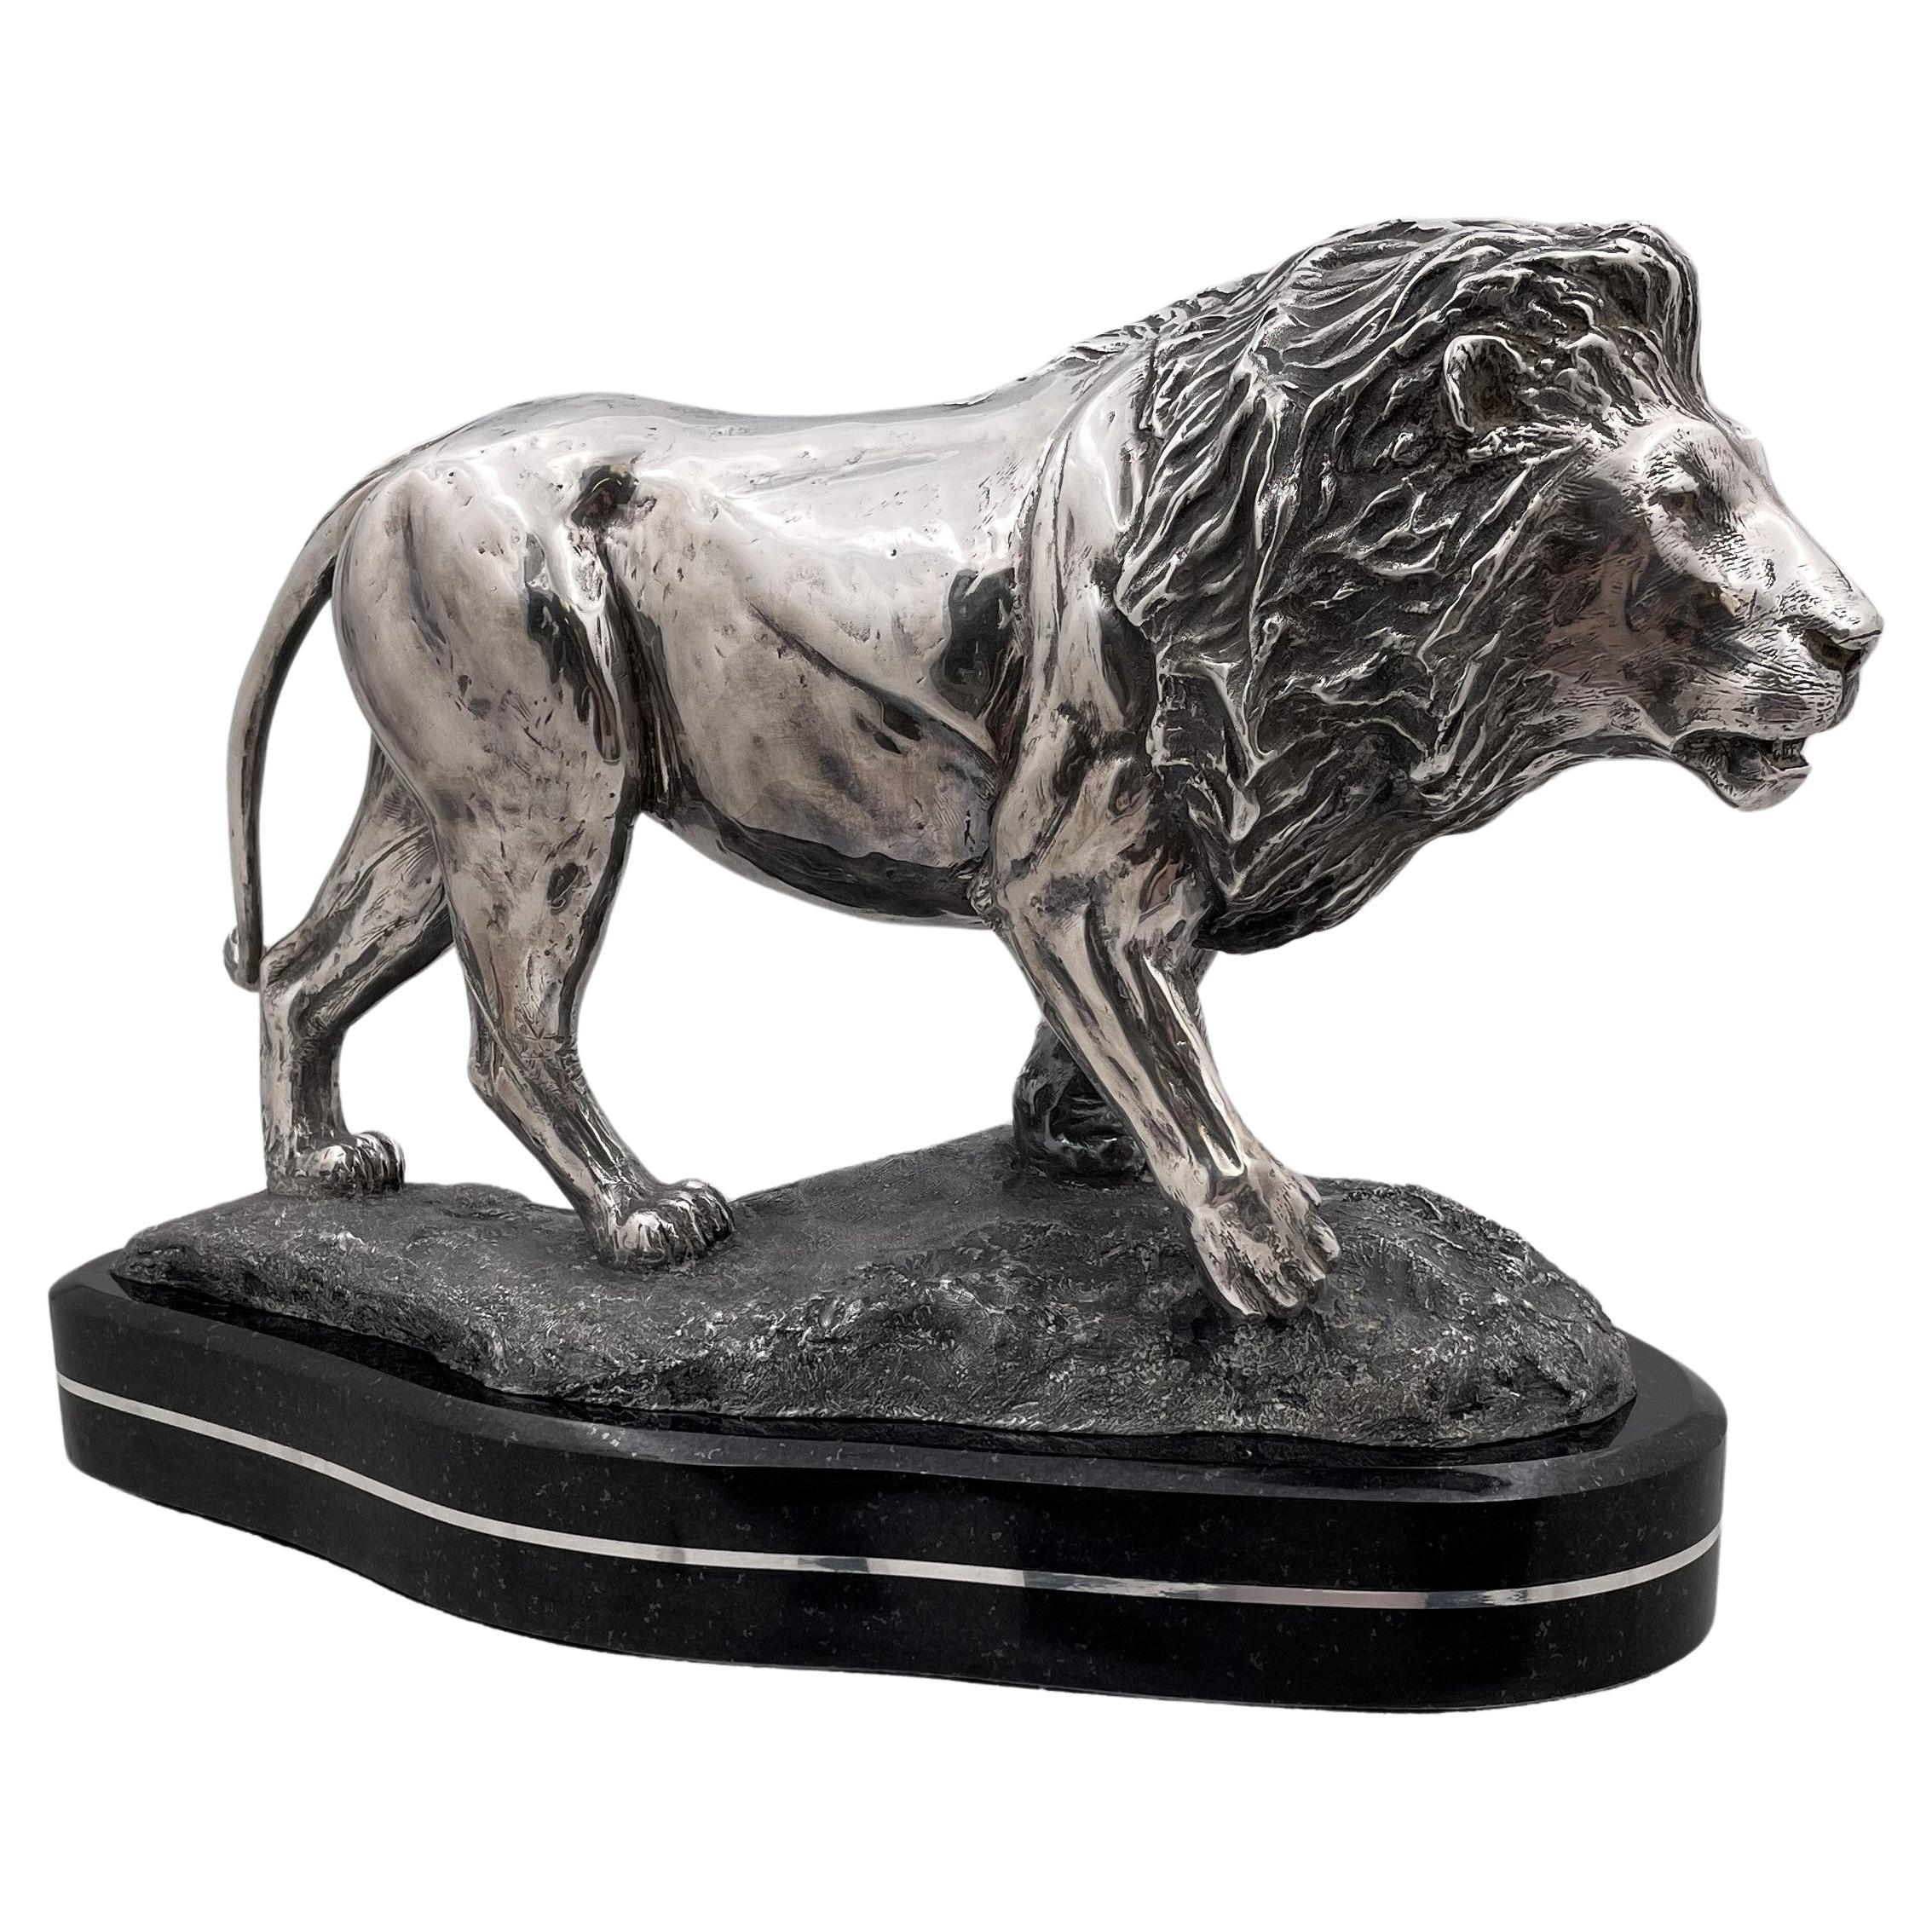 Simba Solid .999 Silver Large Realistic Sculpture of Lion by R. Taylor  For Sale